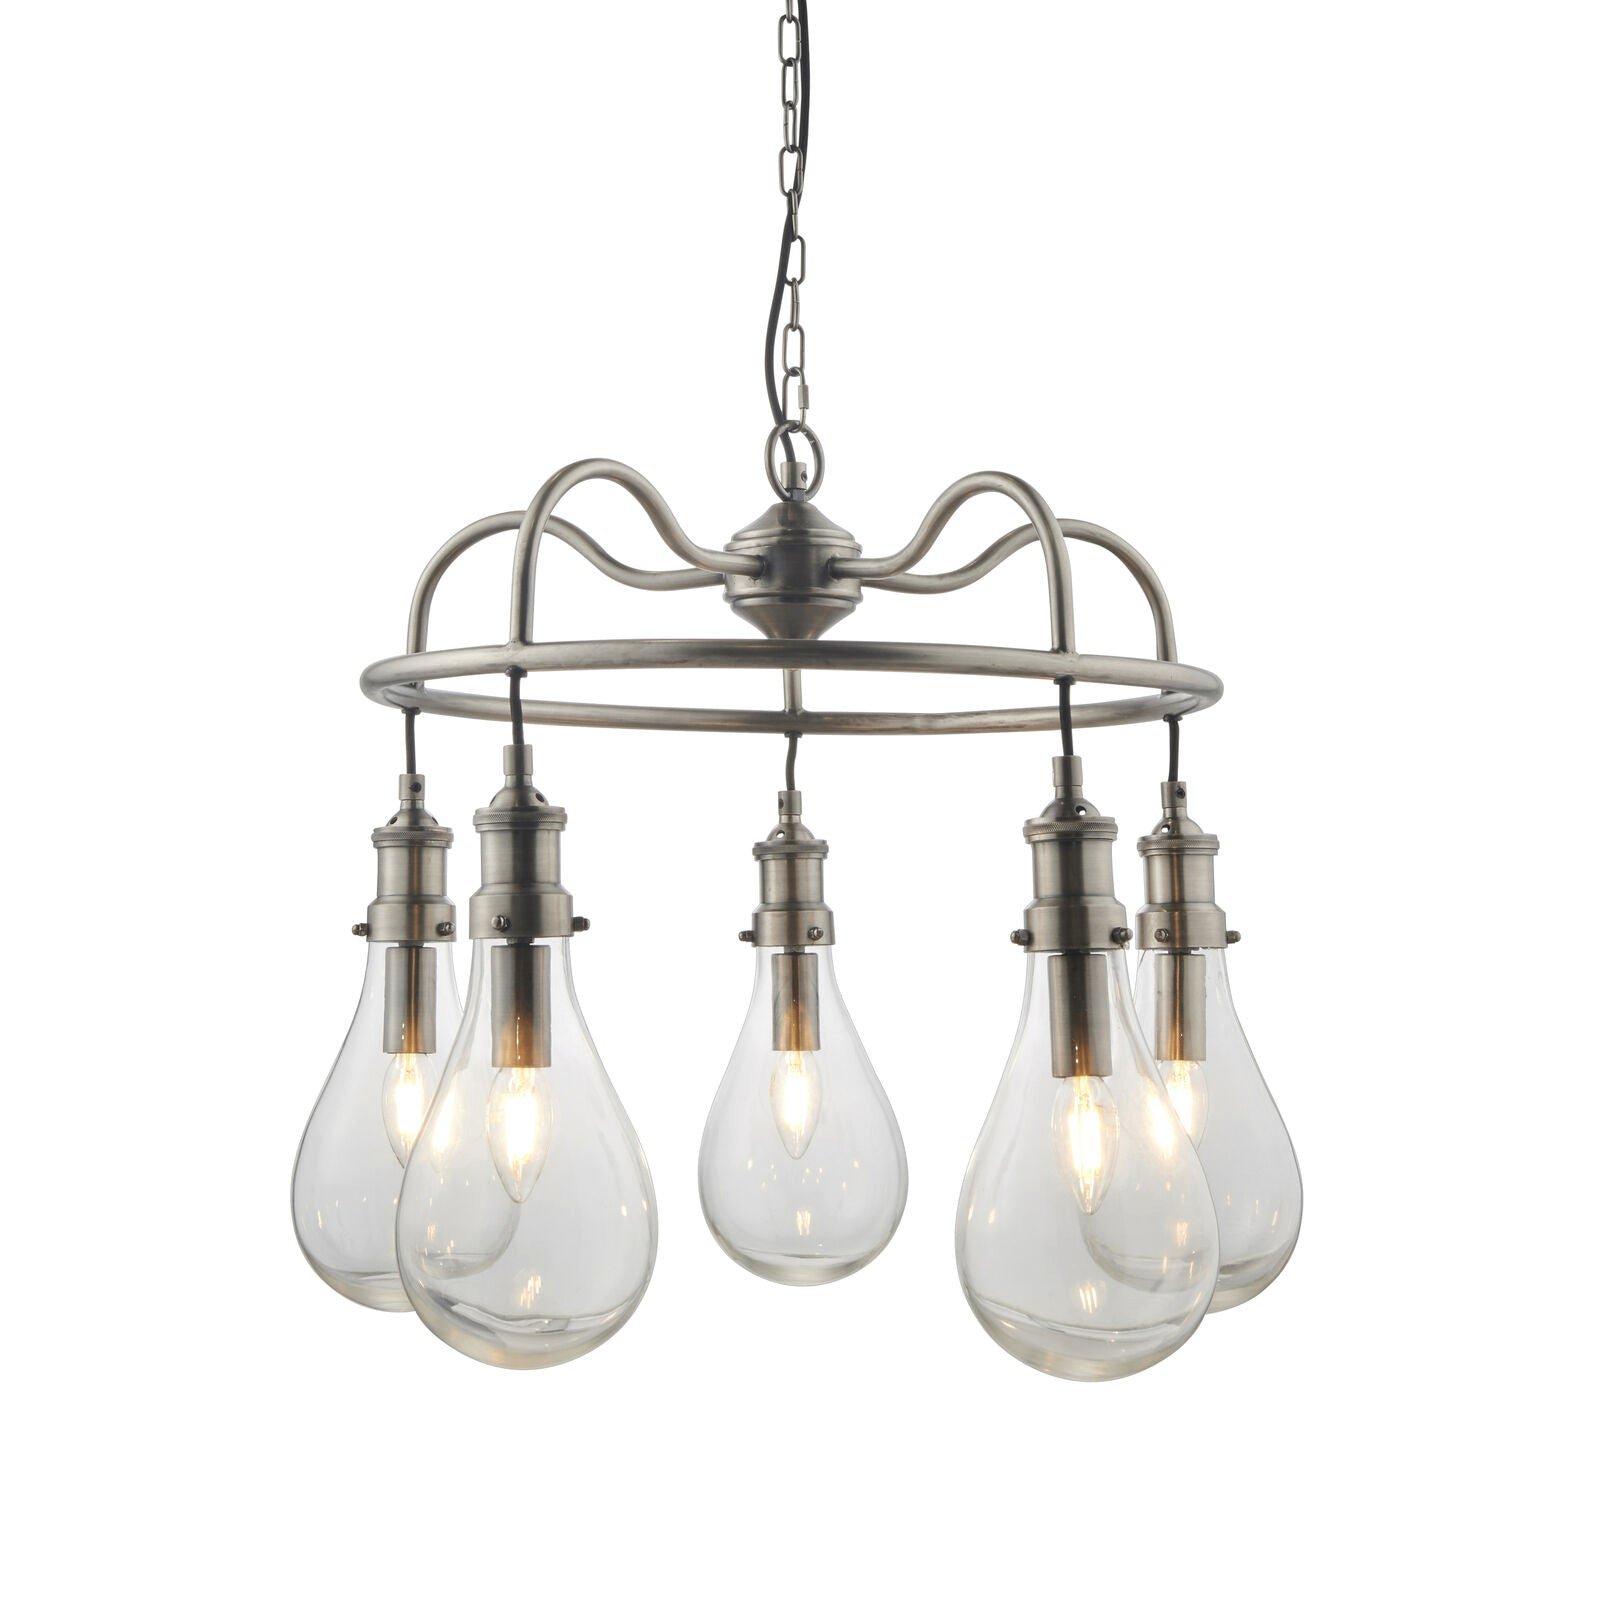 Ceiling Pendant Light - Antique Nickel Plate & Clear Glass - 5 x 6W LED E14